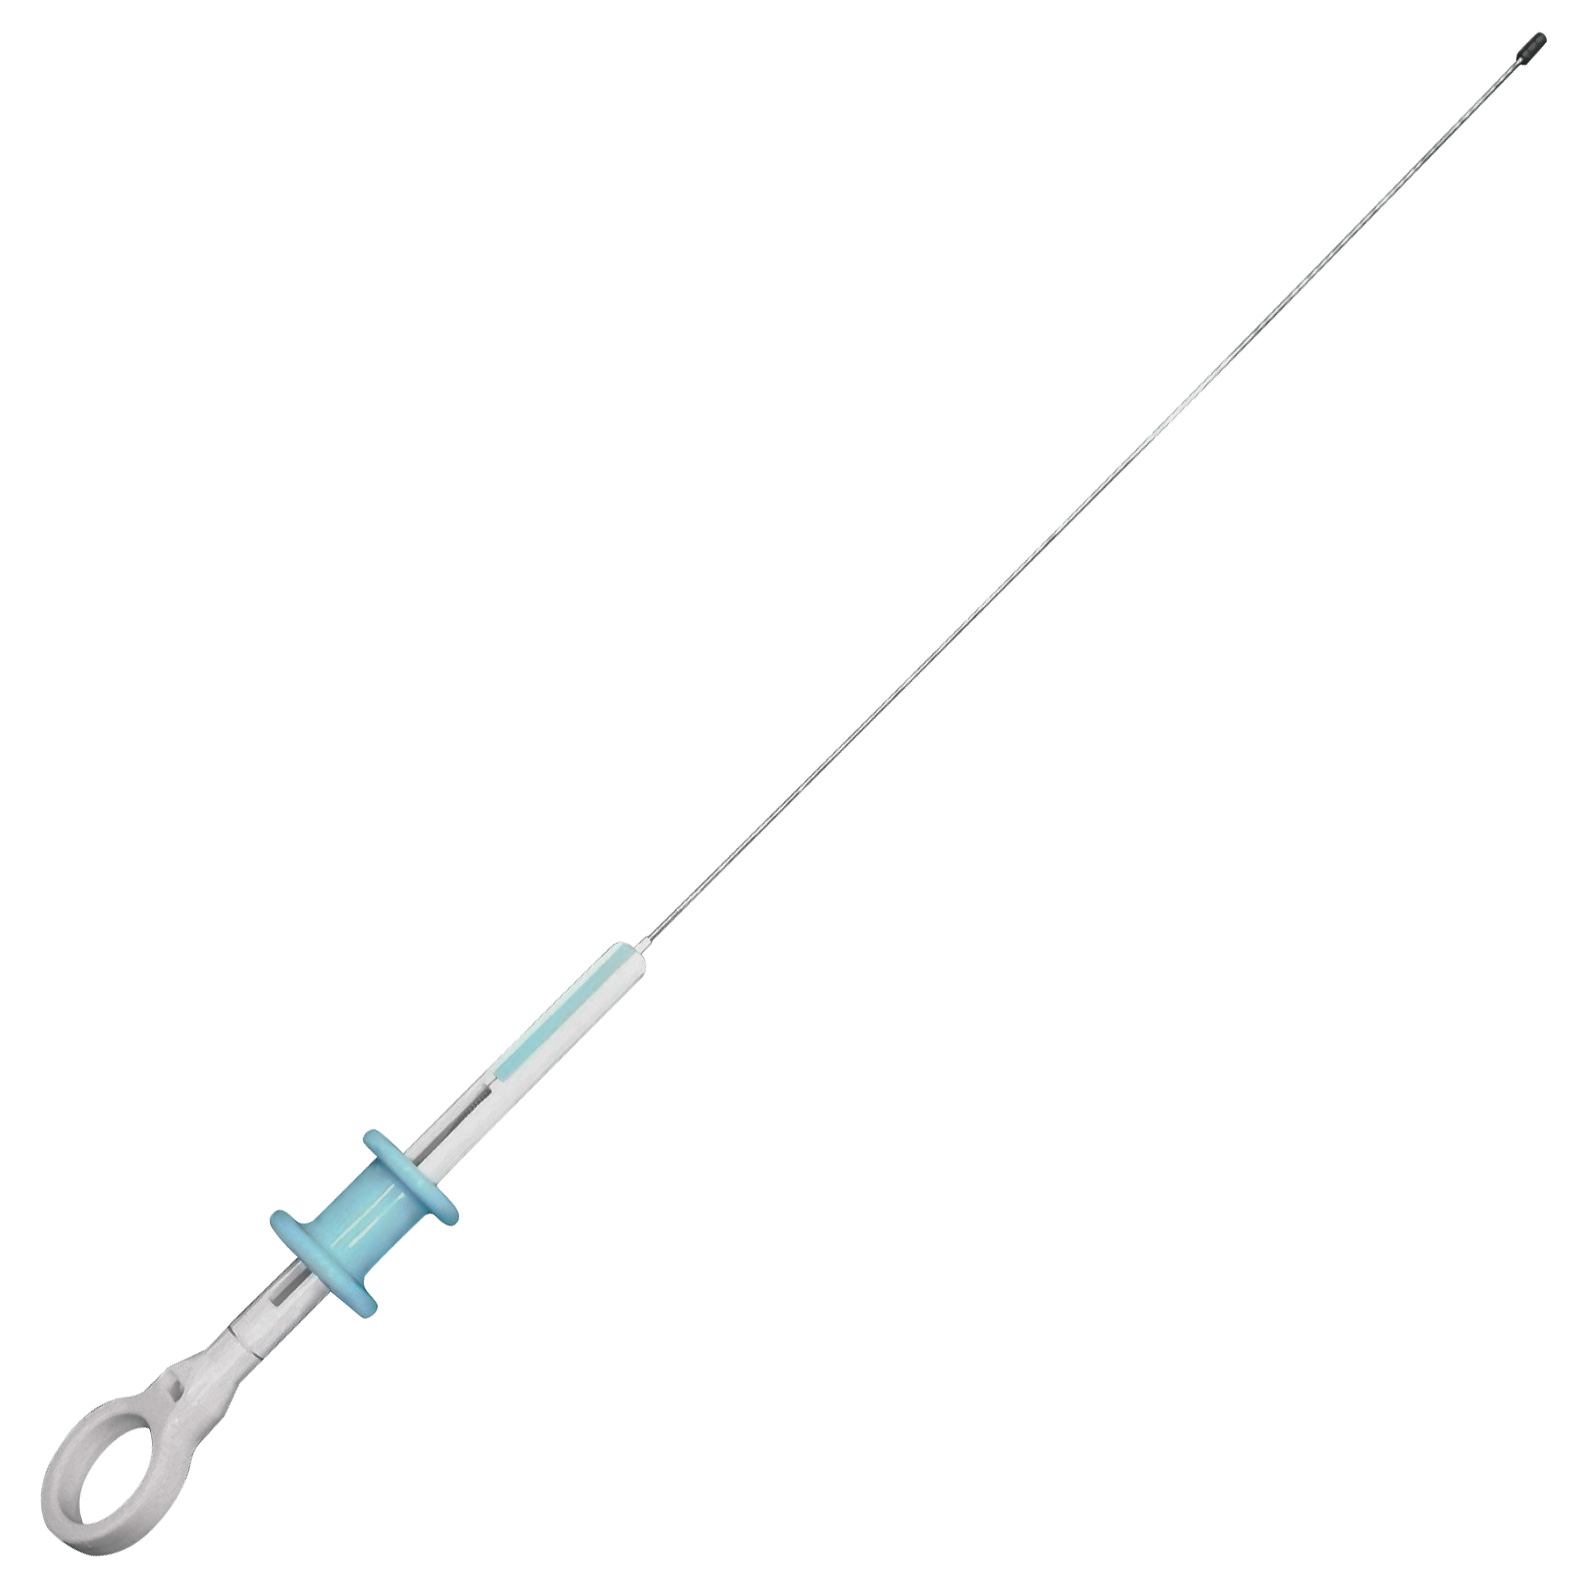 disposable gynecology biopsy forceps 3